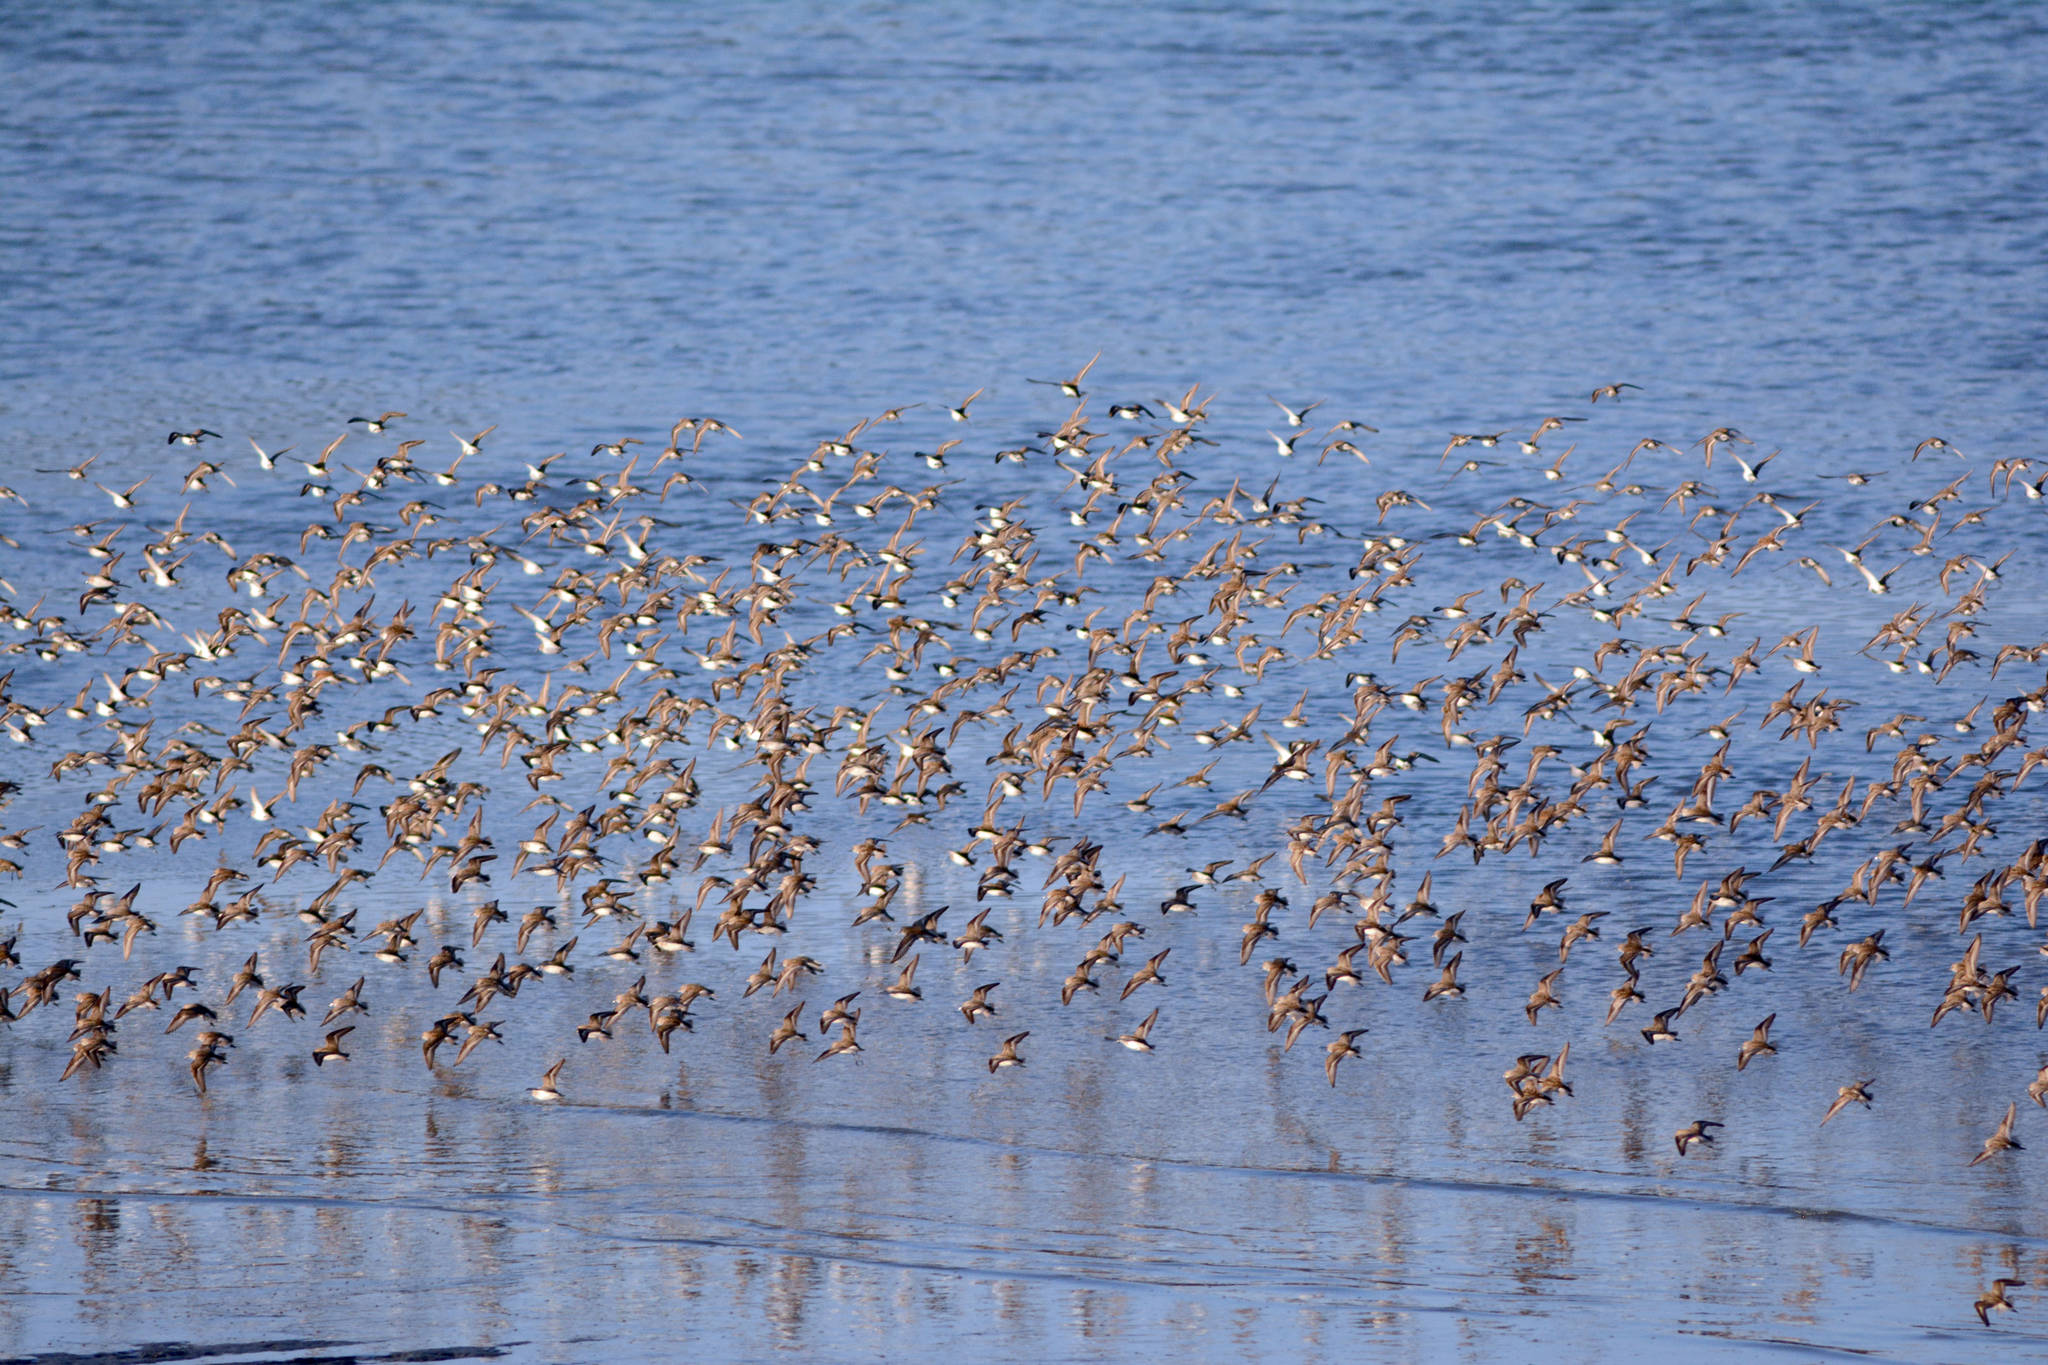 Western sandpipers, dunlins and maybe a few least sandpipers feed in Mud Bay on Tuesday night. A pulse of about 8,000 sandpipers flew in Tuesday.